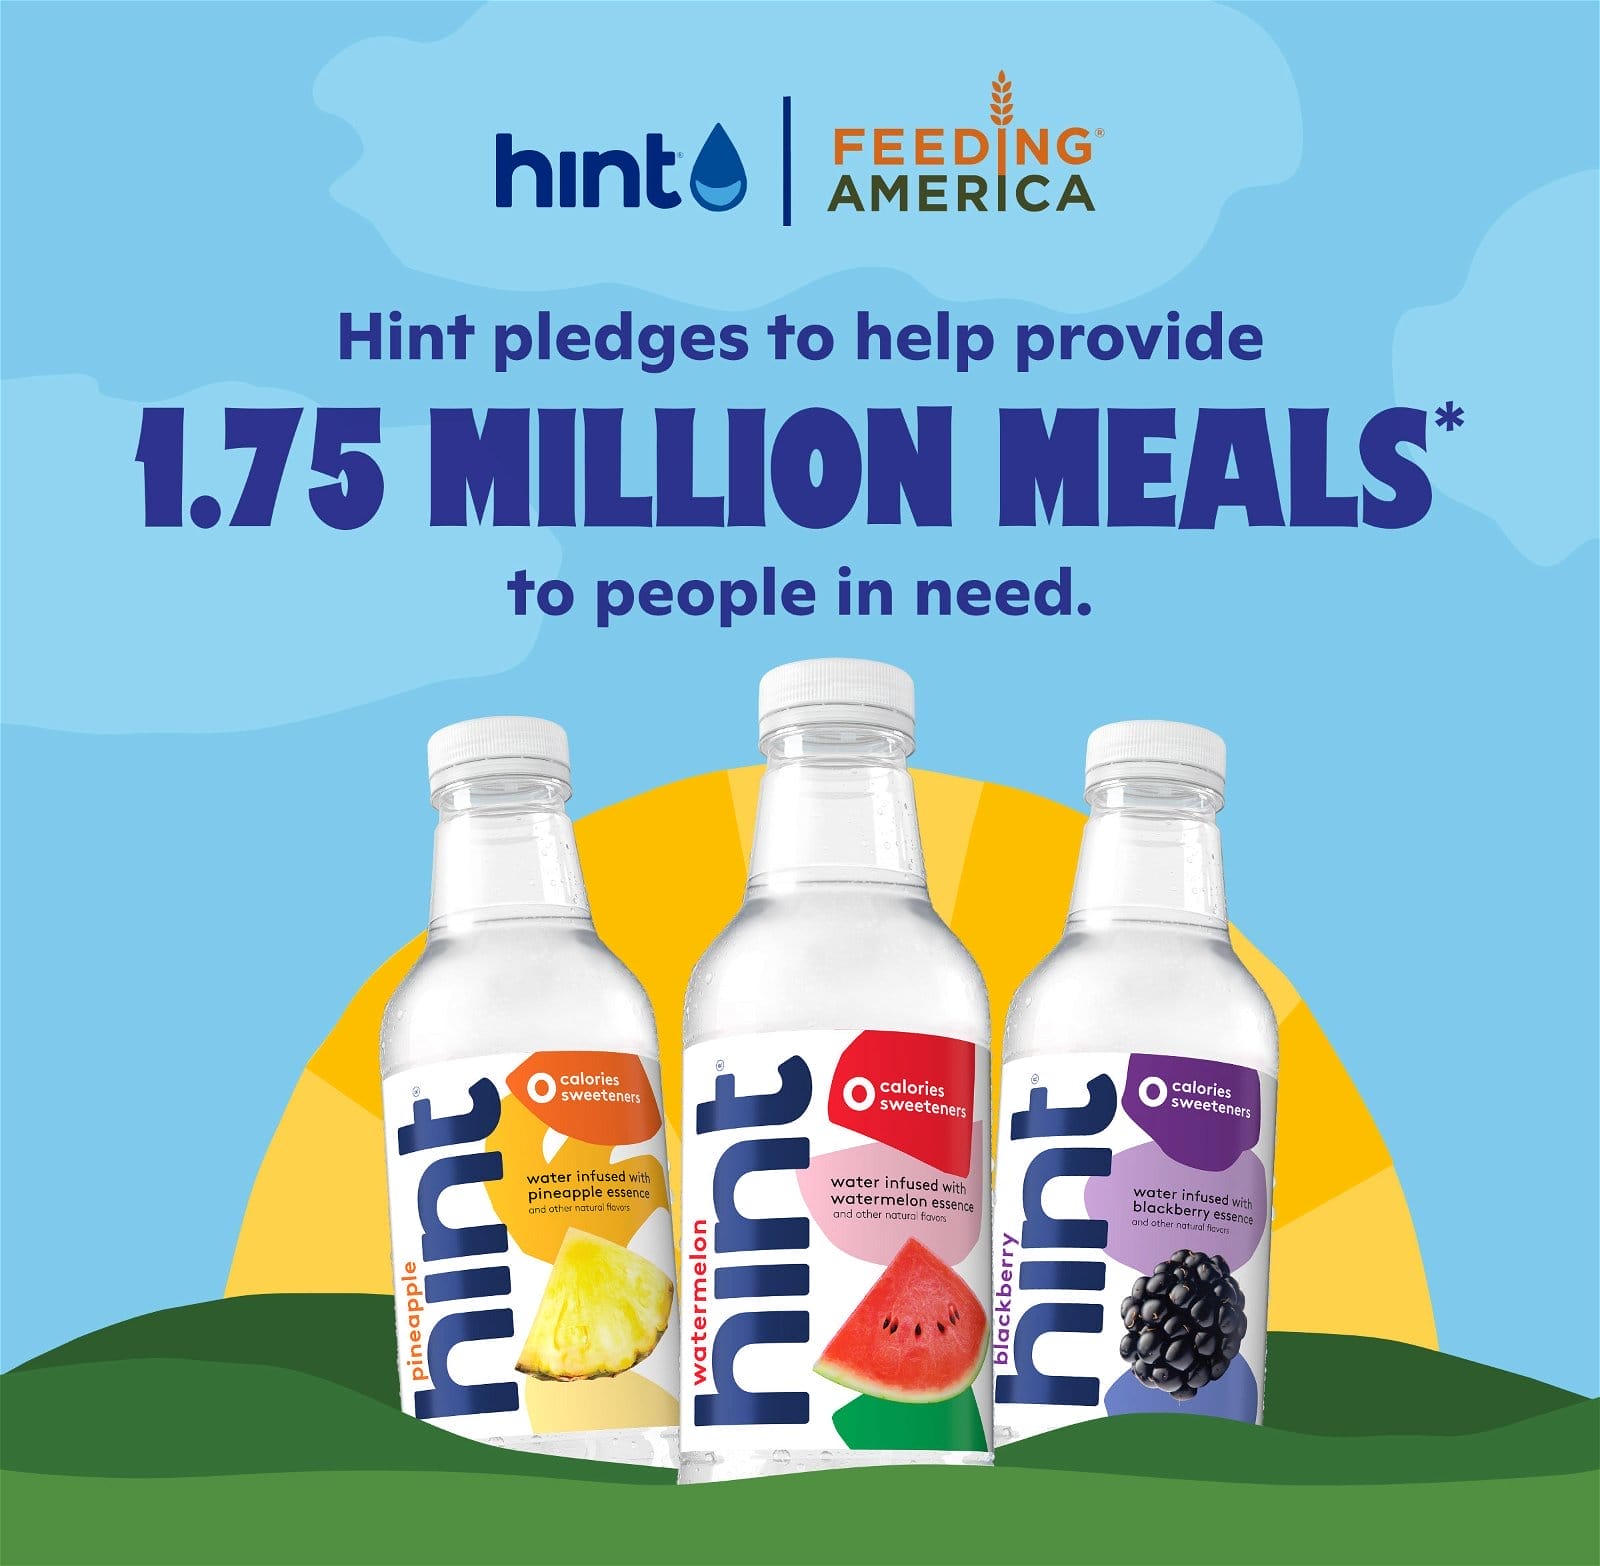 Hint pledges to help provide 1.75 million meals to people in need